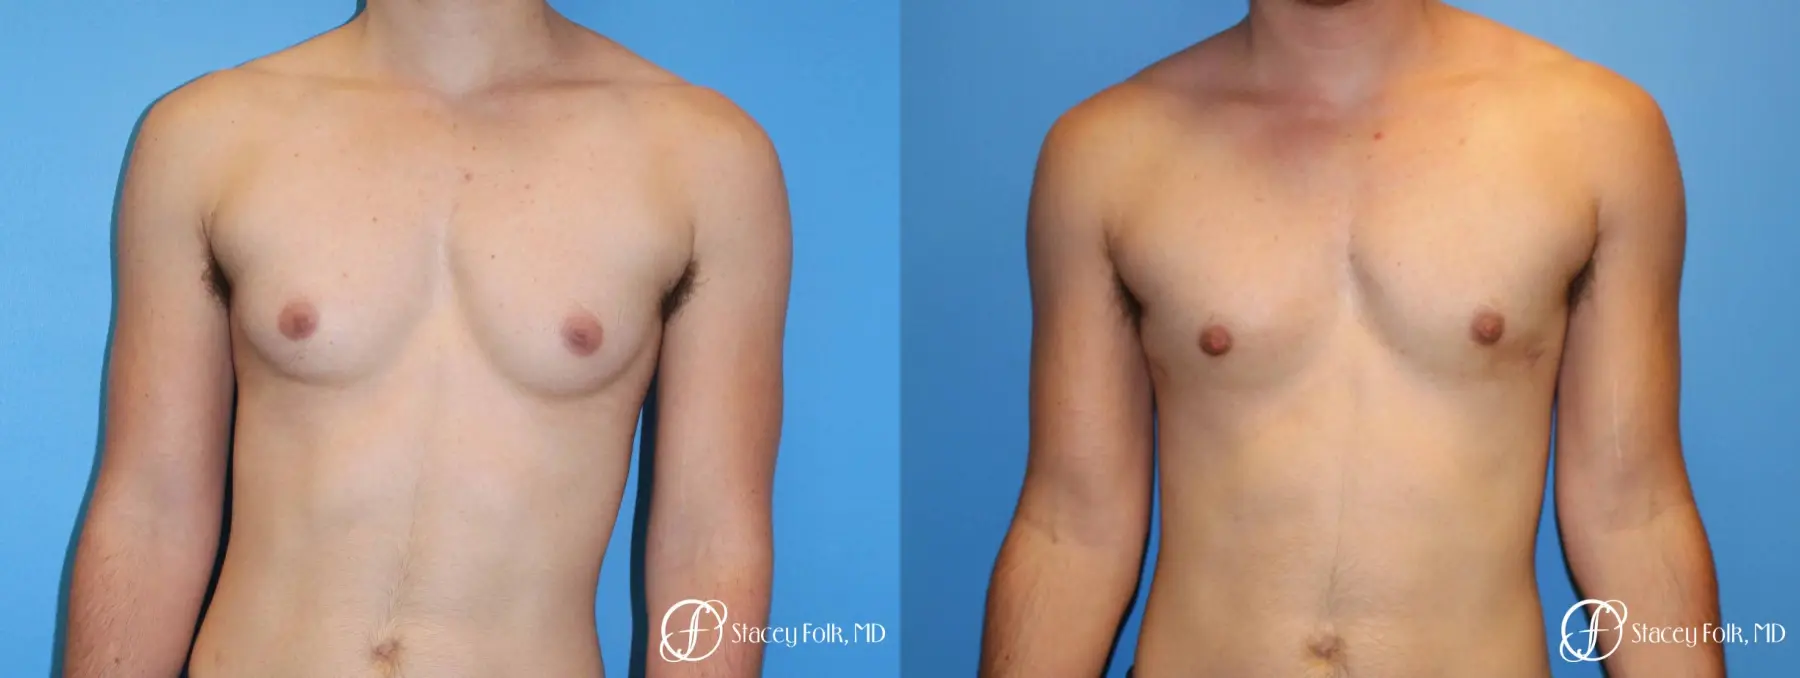 Denver FTM female to male top surgery using gynecomastia technique 5128 - Before and After